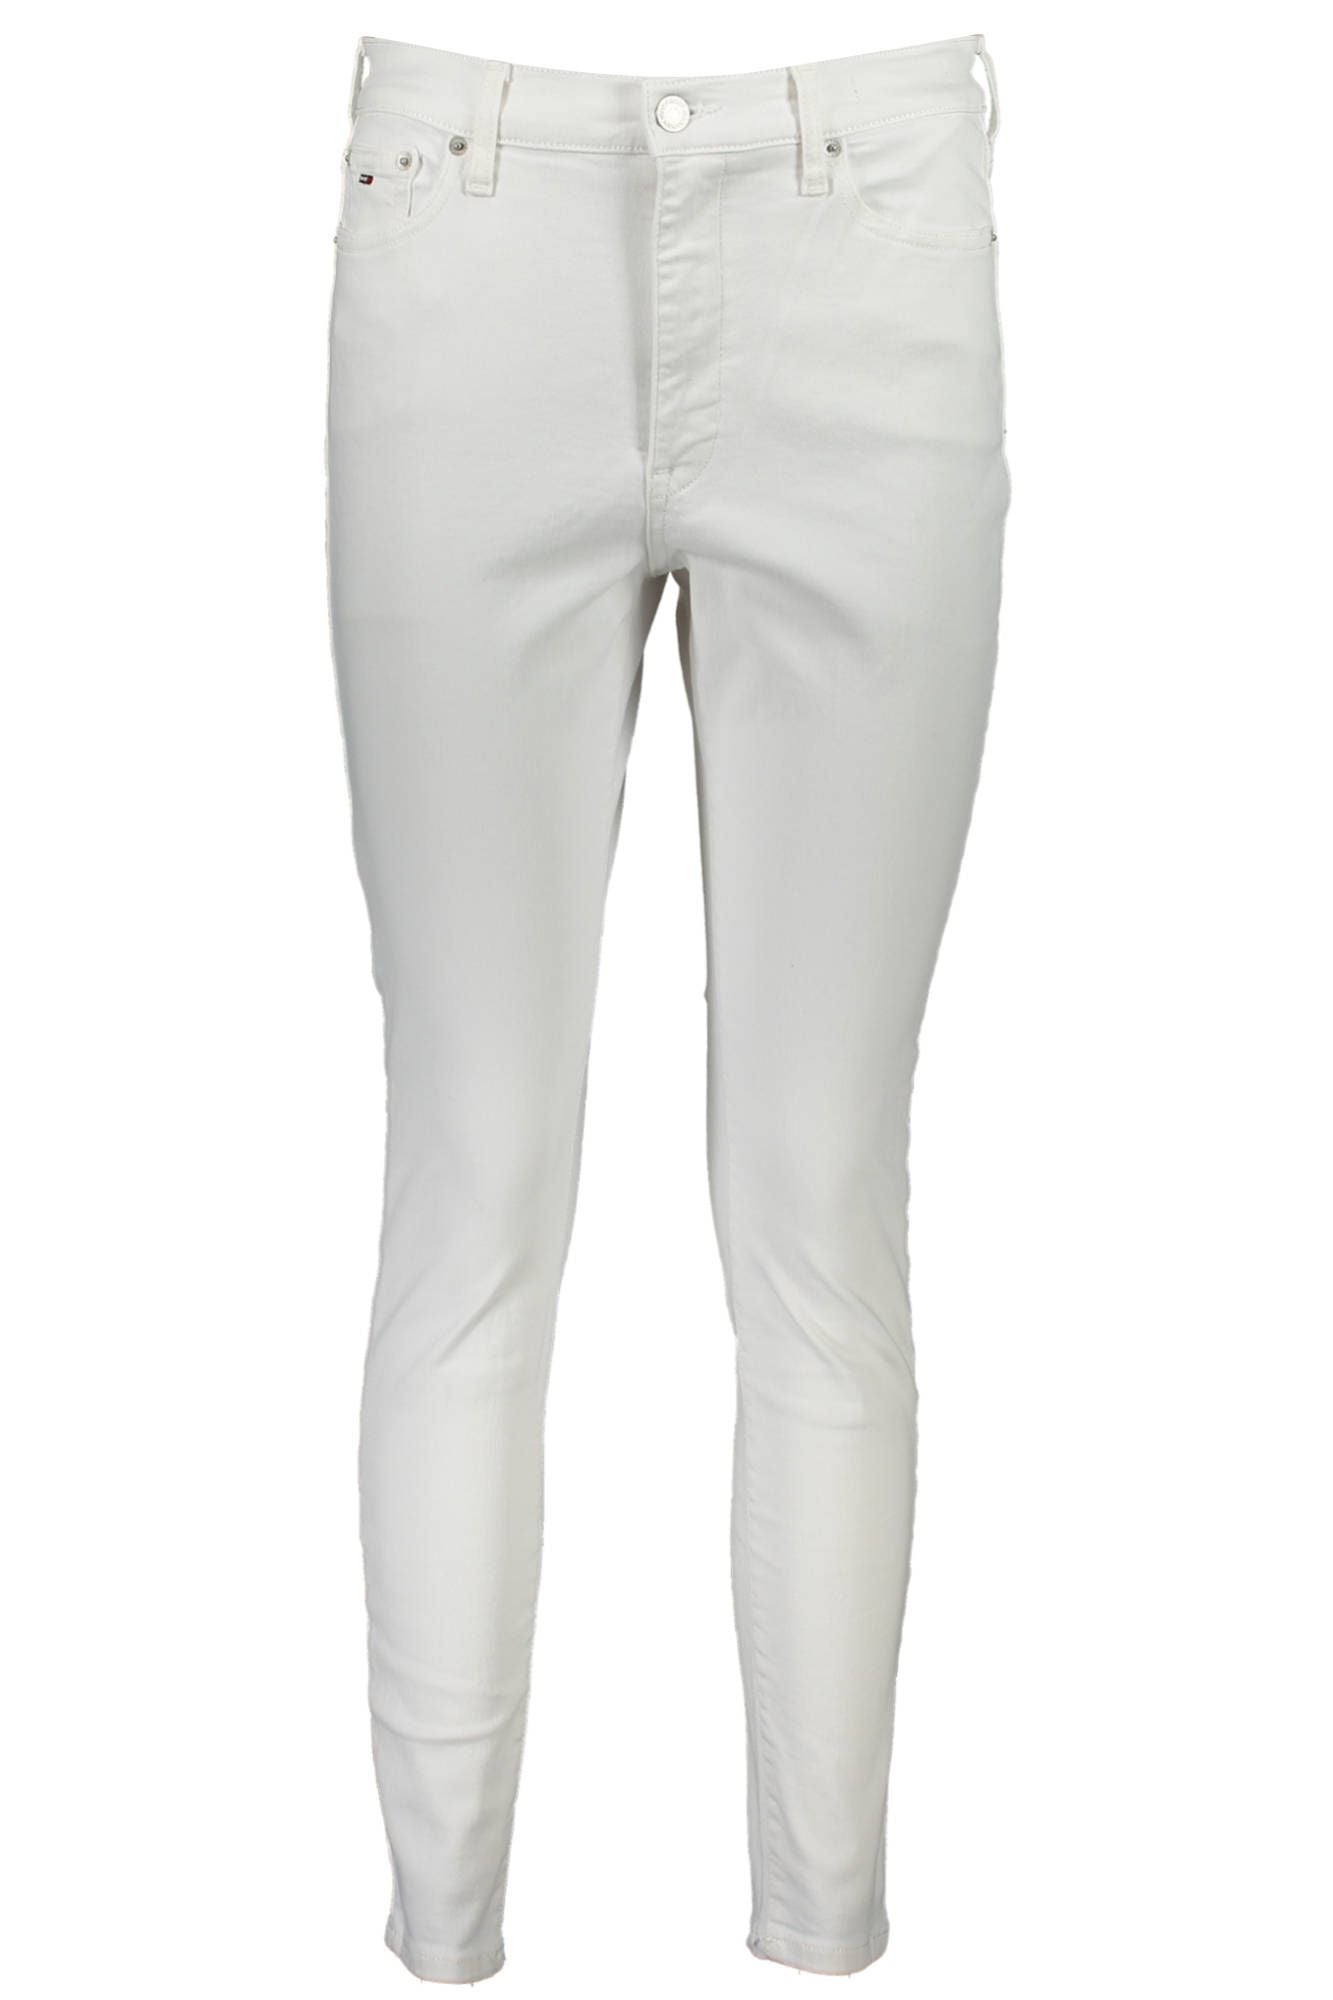 Chic White Sylvia Jeans for Sophisticated Style